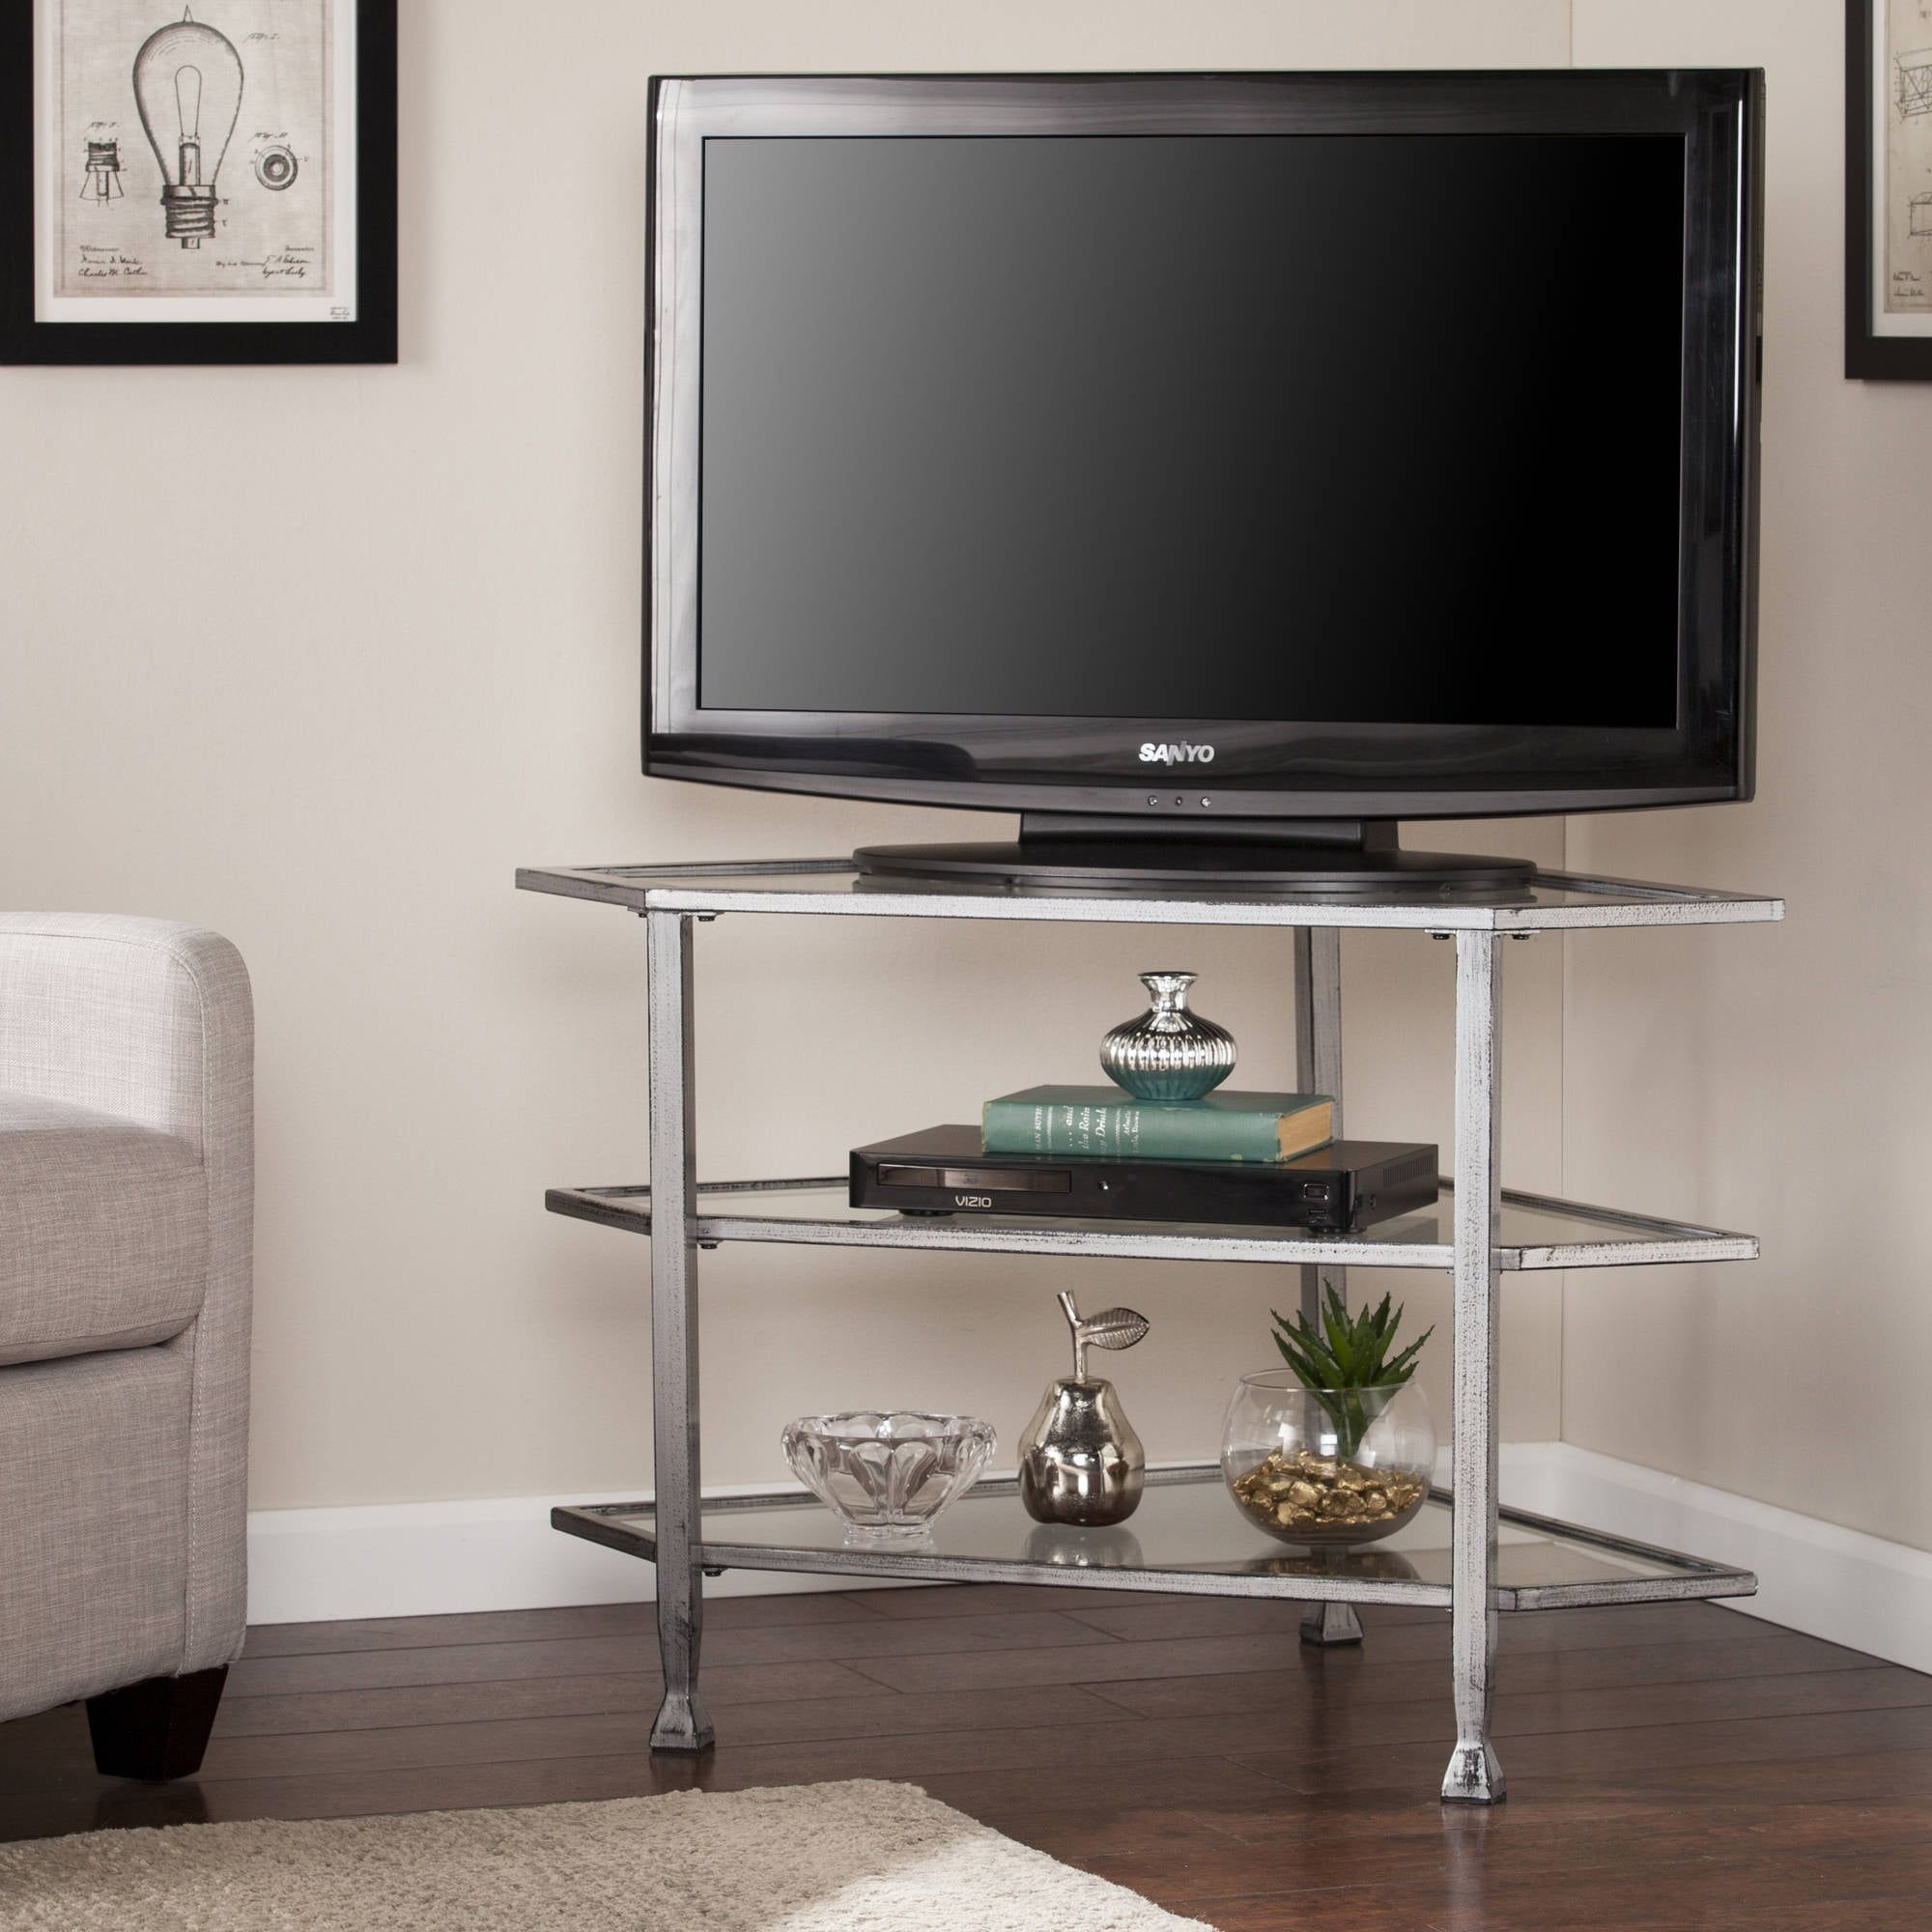 Southern Enterprises Jumpluff Metal/glass Corner Tv Stand For Tvs Up To Inside Glass Shelves Tv Stands (View 16 of 20)